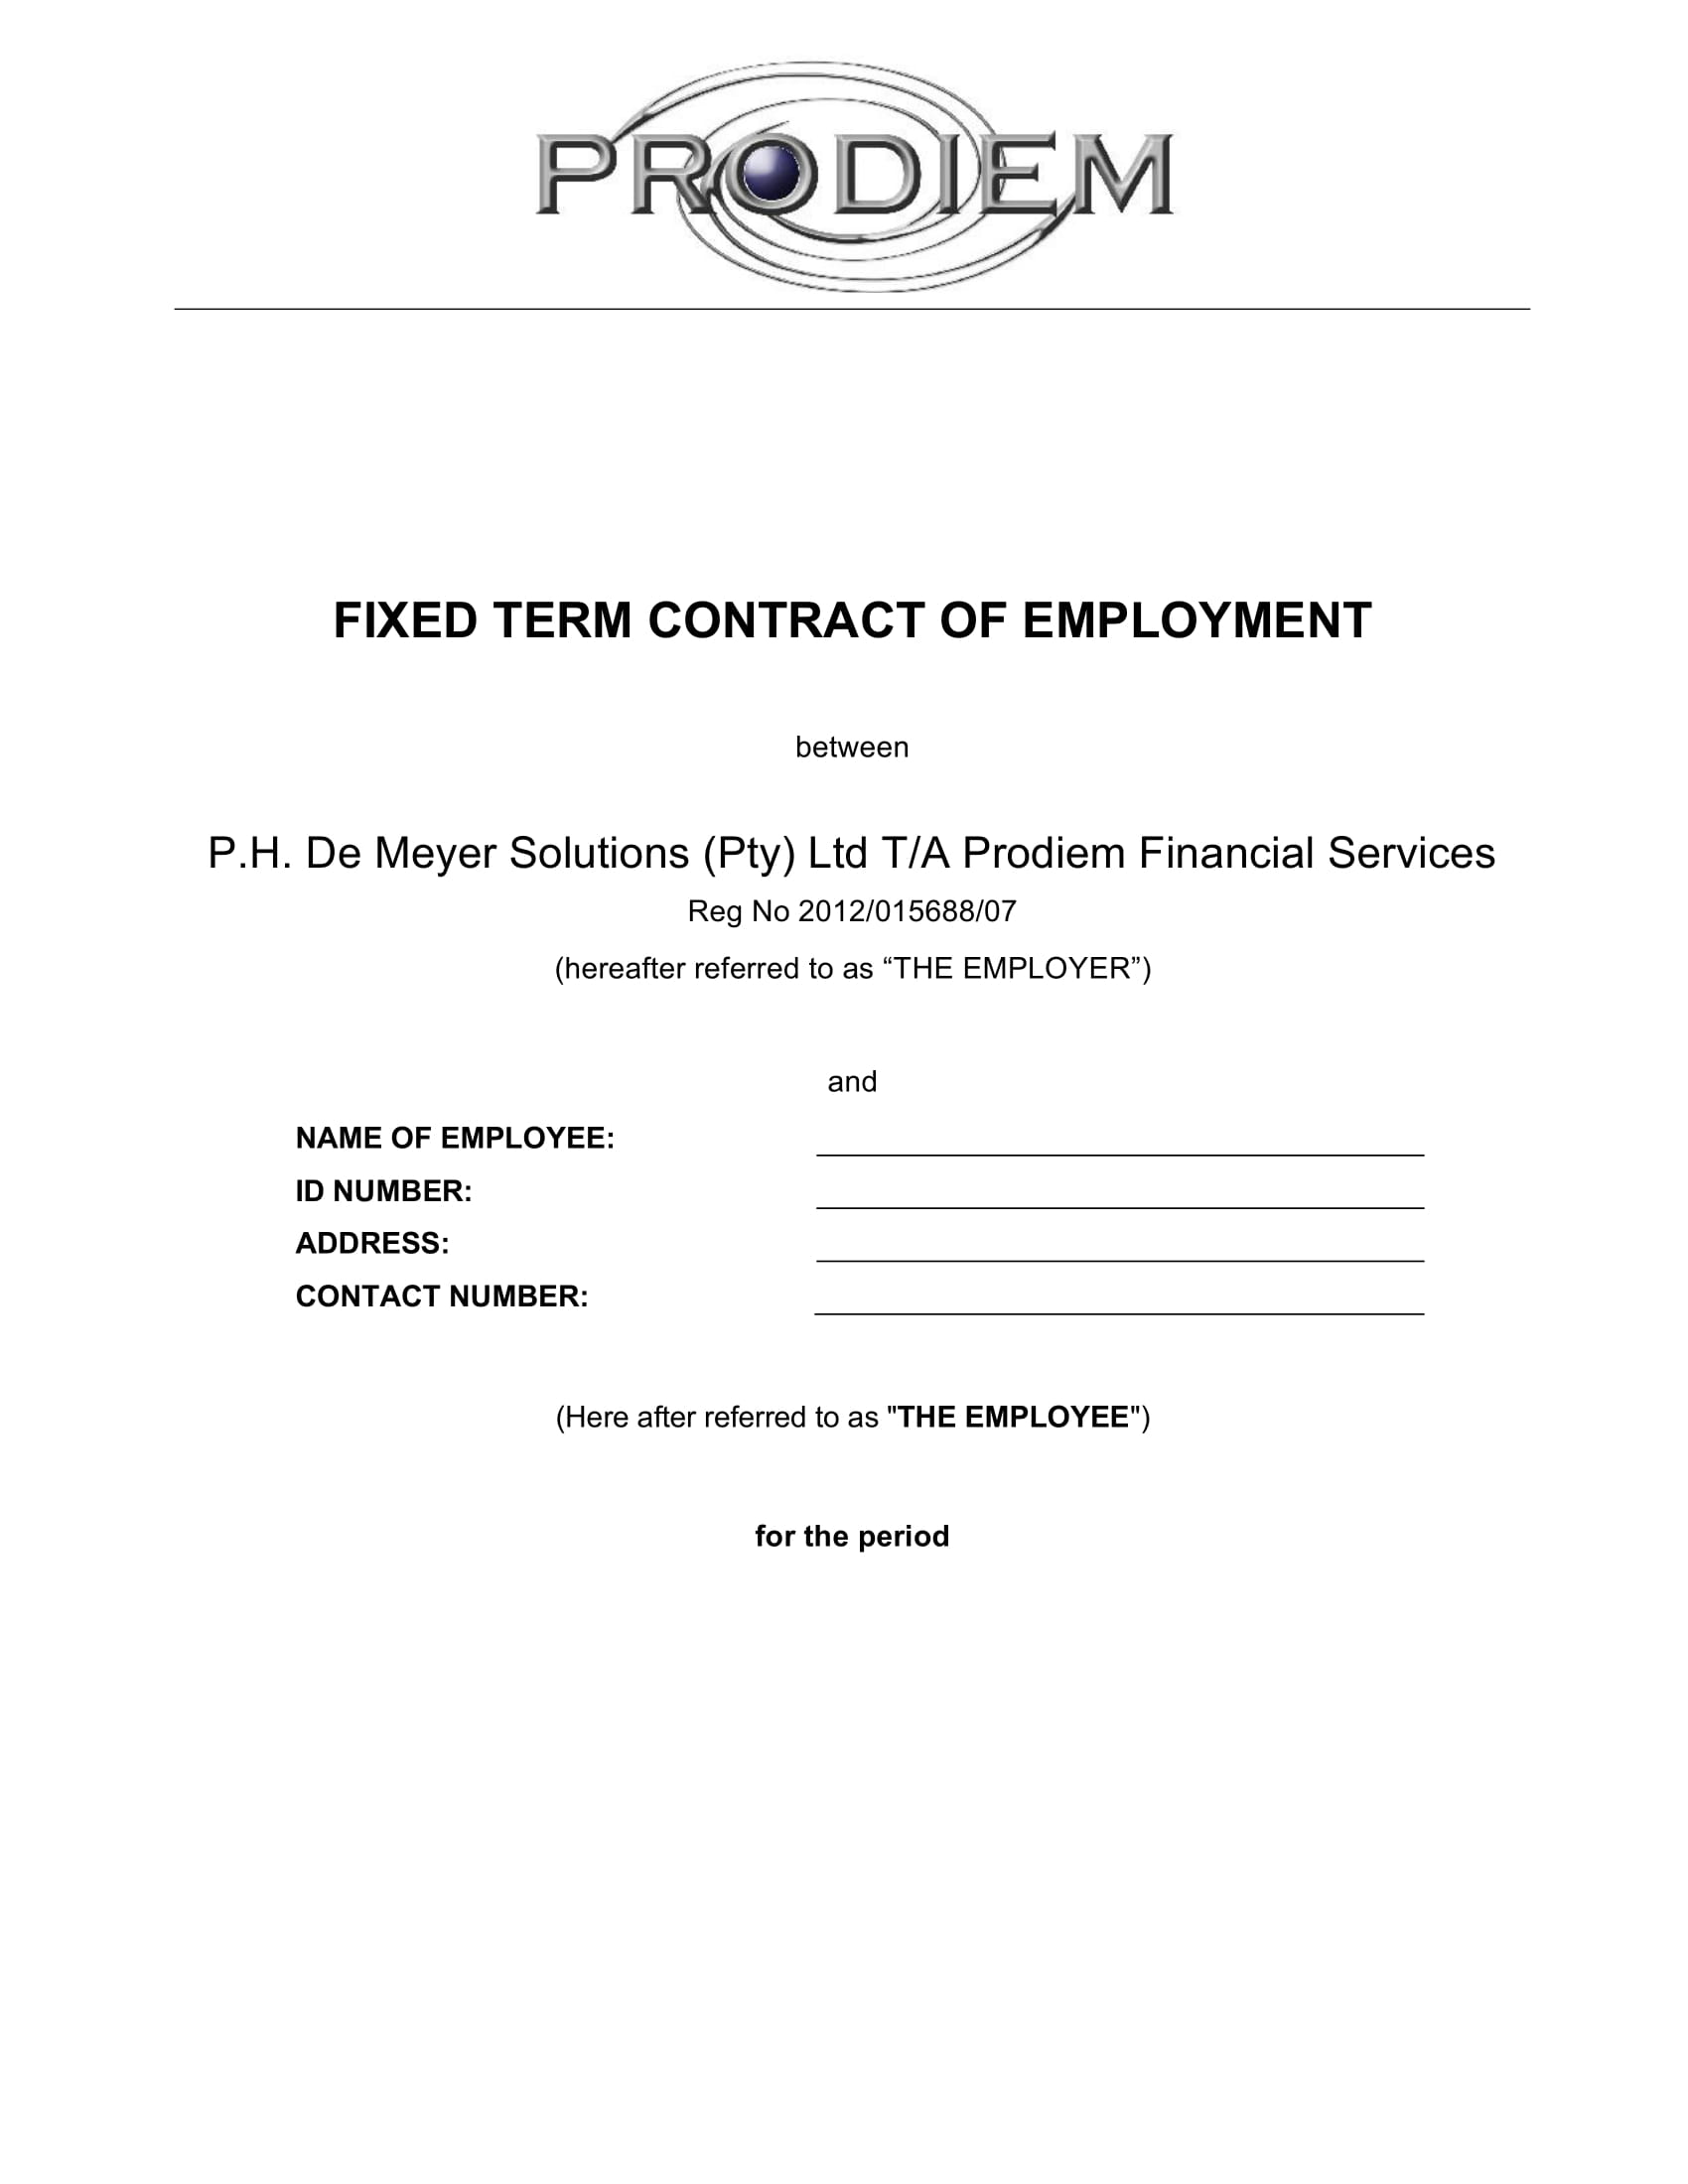 fixed term contract of employment